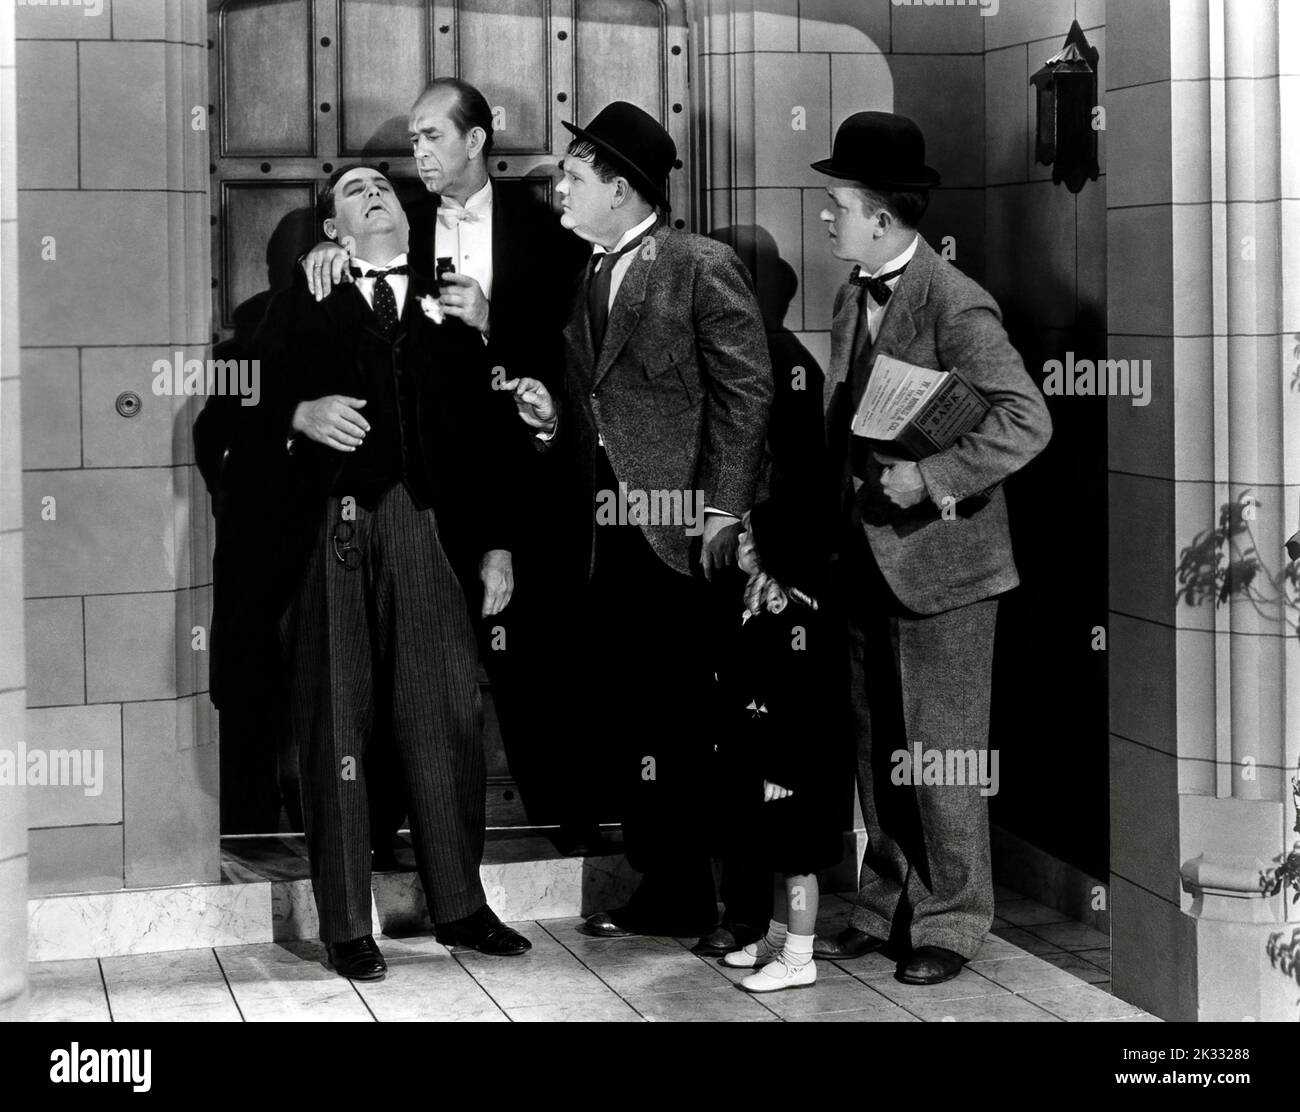 Stan Laurel and Oliver Hardy in the  film scene 'Pack Up Your Troubles' 1932 Stock Photo